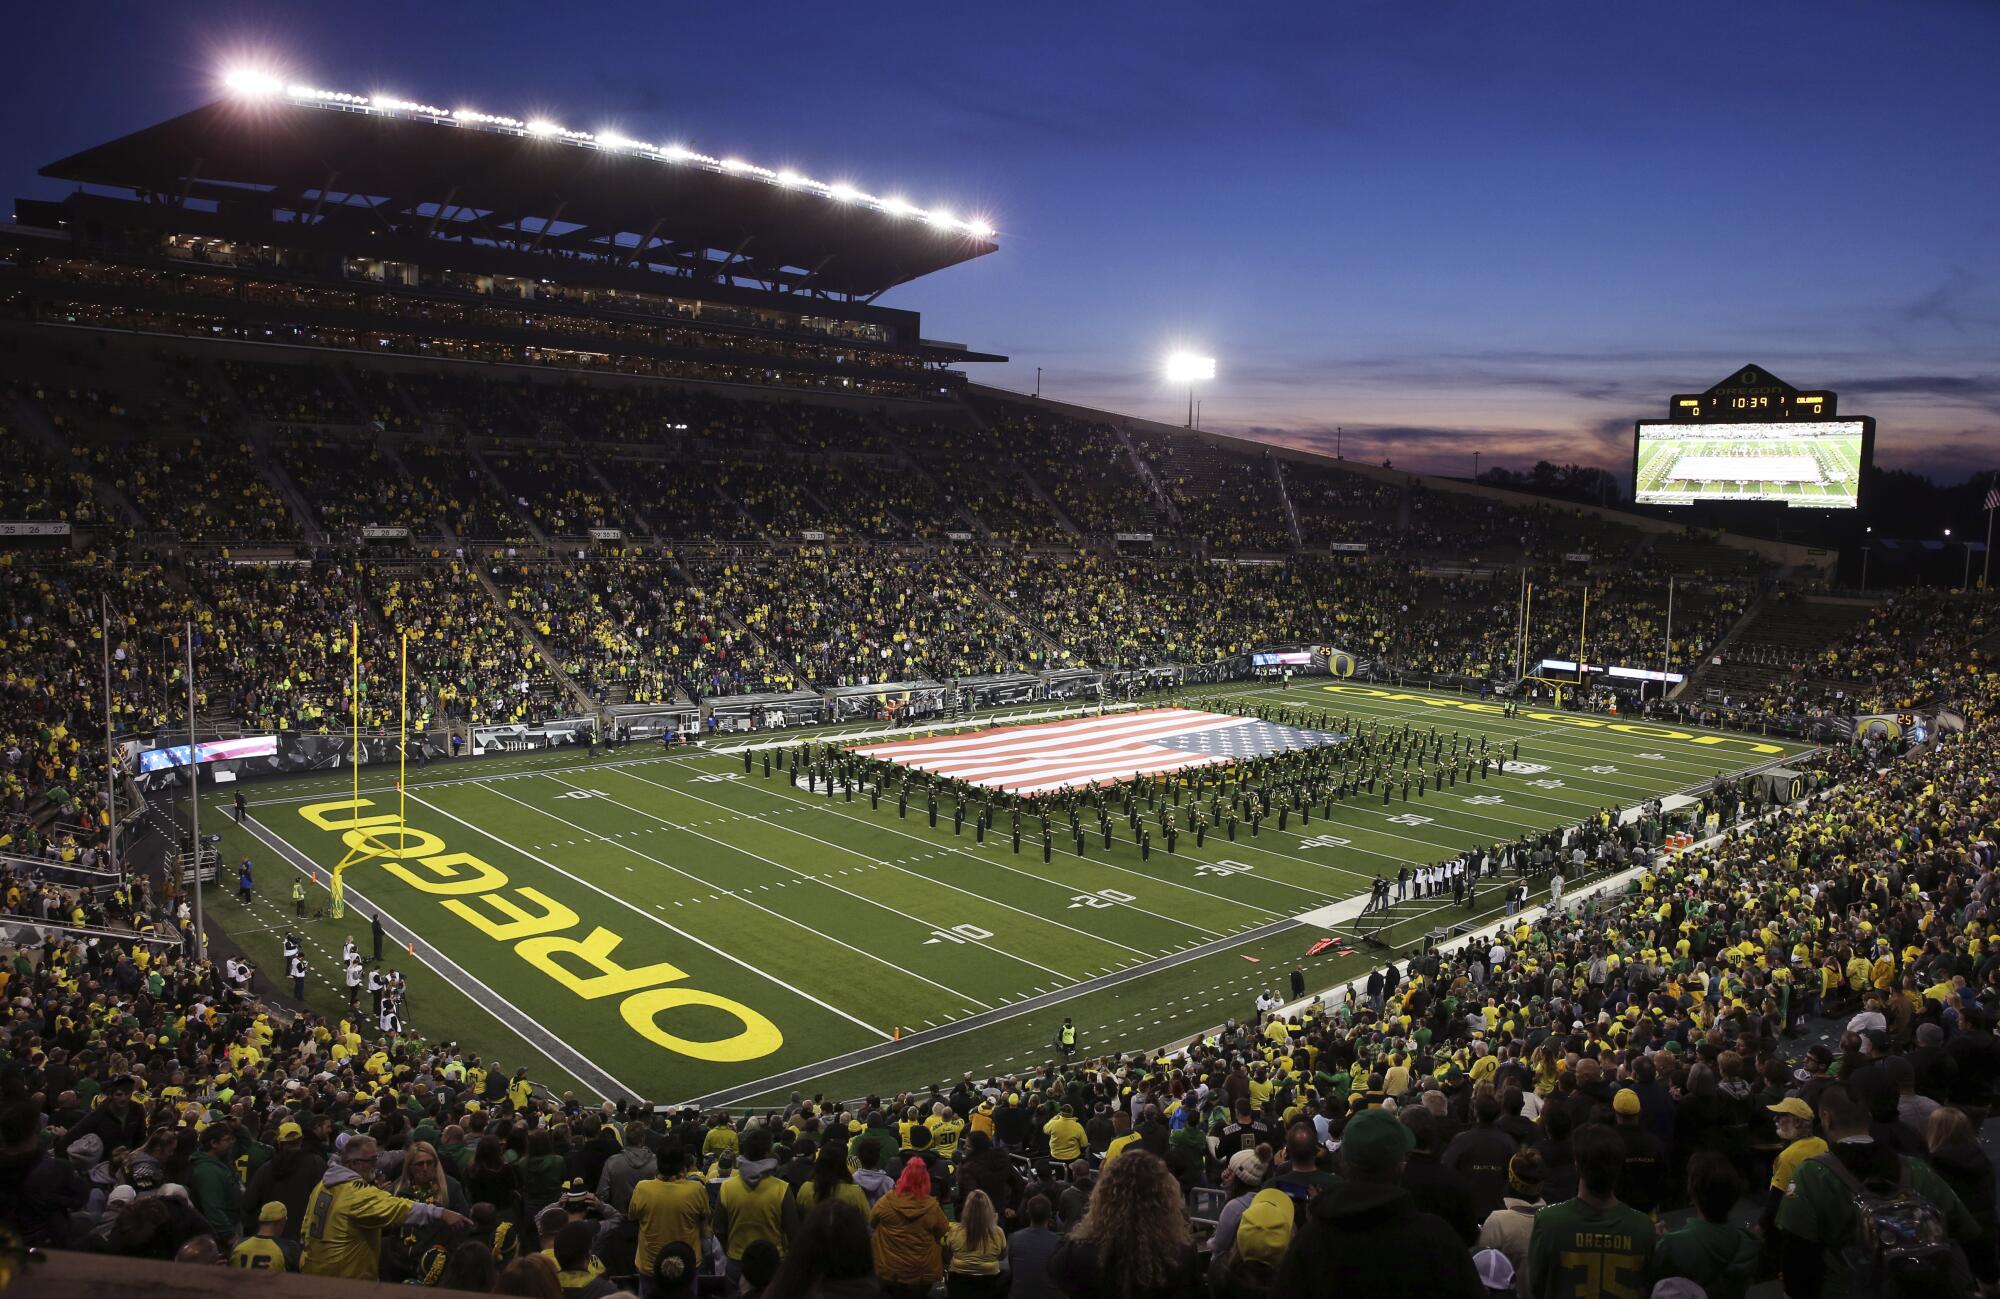 The Oregon Marching Band displays a giant United States Flag on the field at Autzen Stadium.